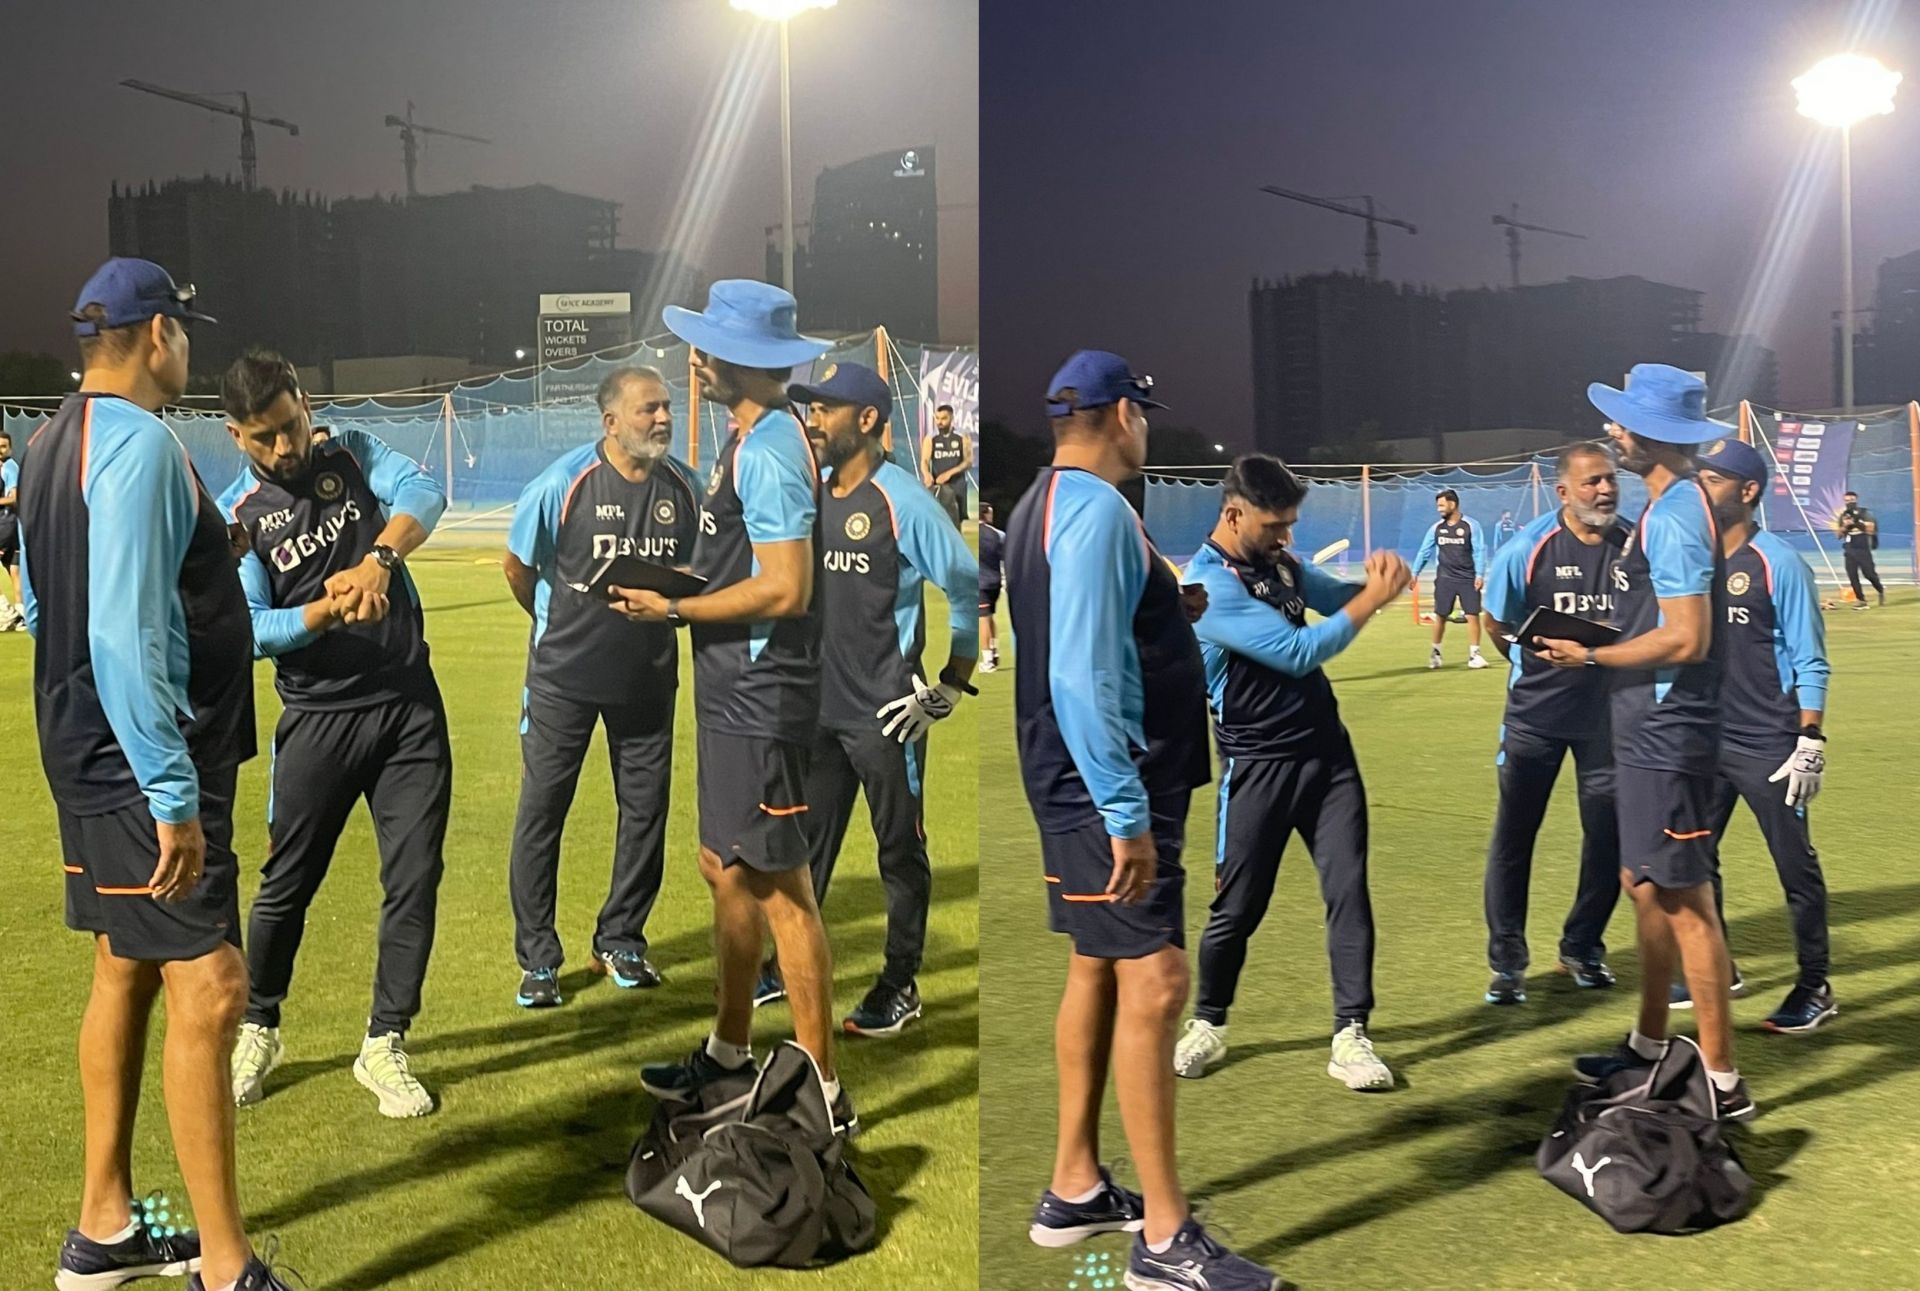 MS Dhoni in the company if other coaching staff members. (Image: BCCI)